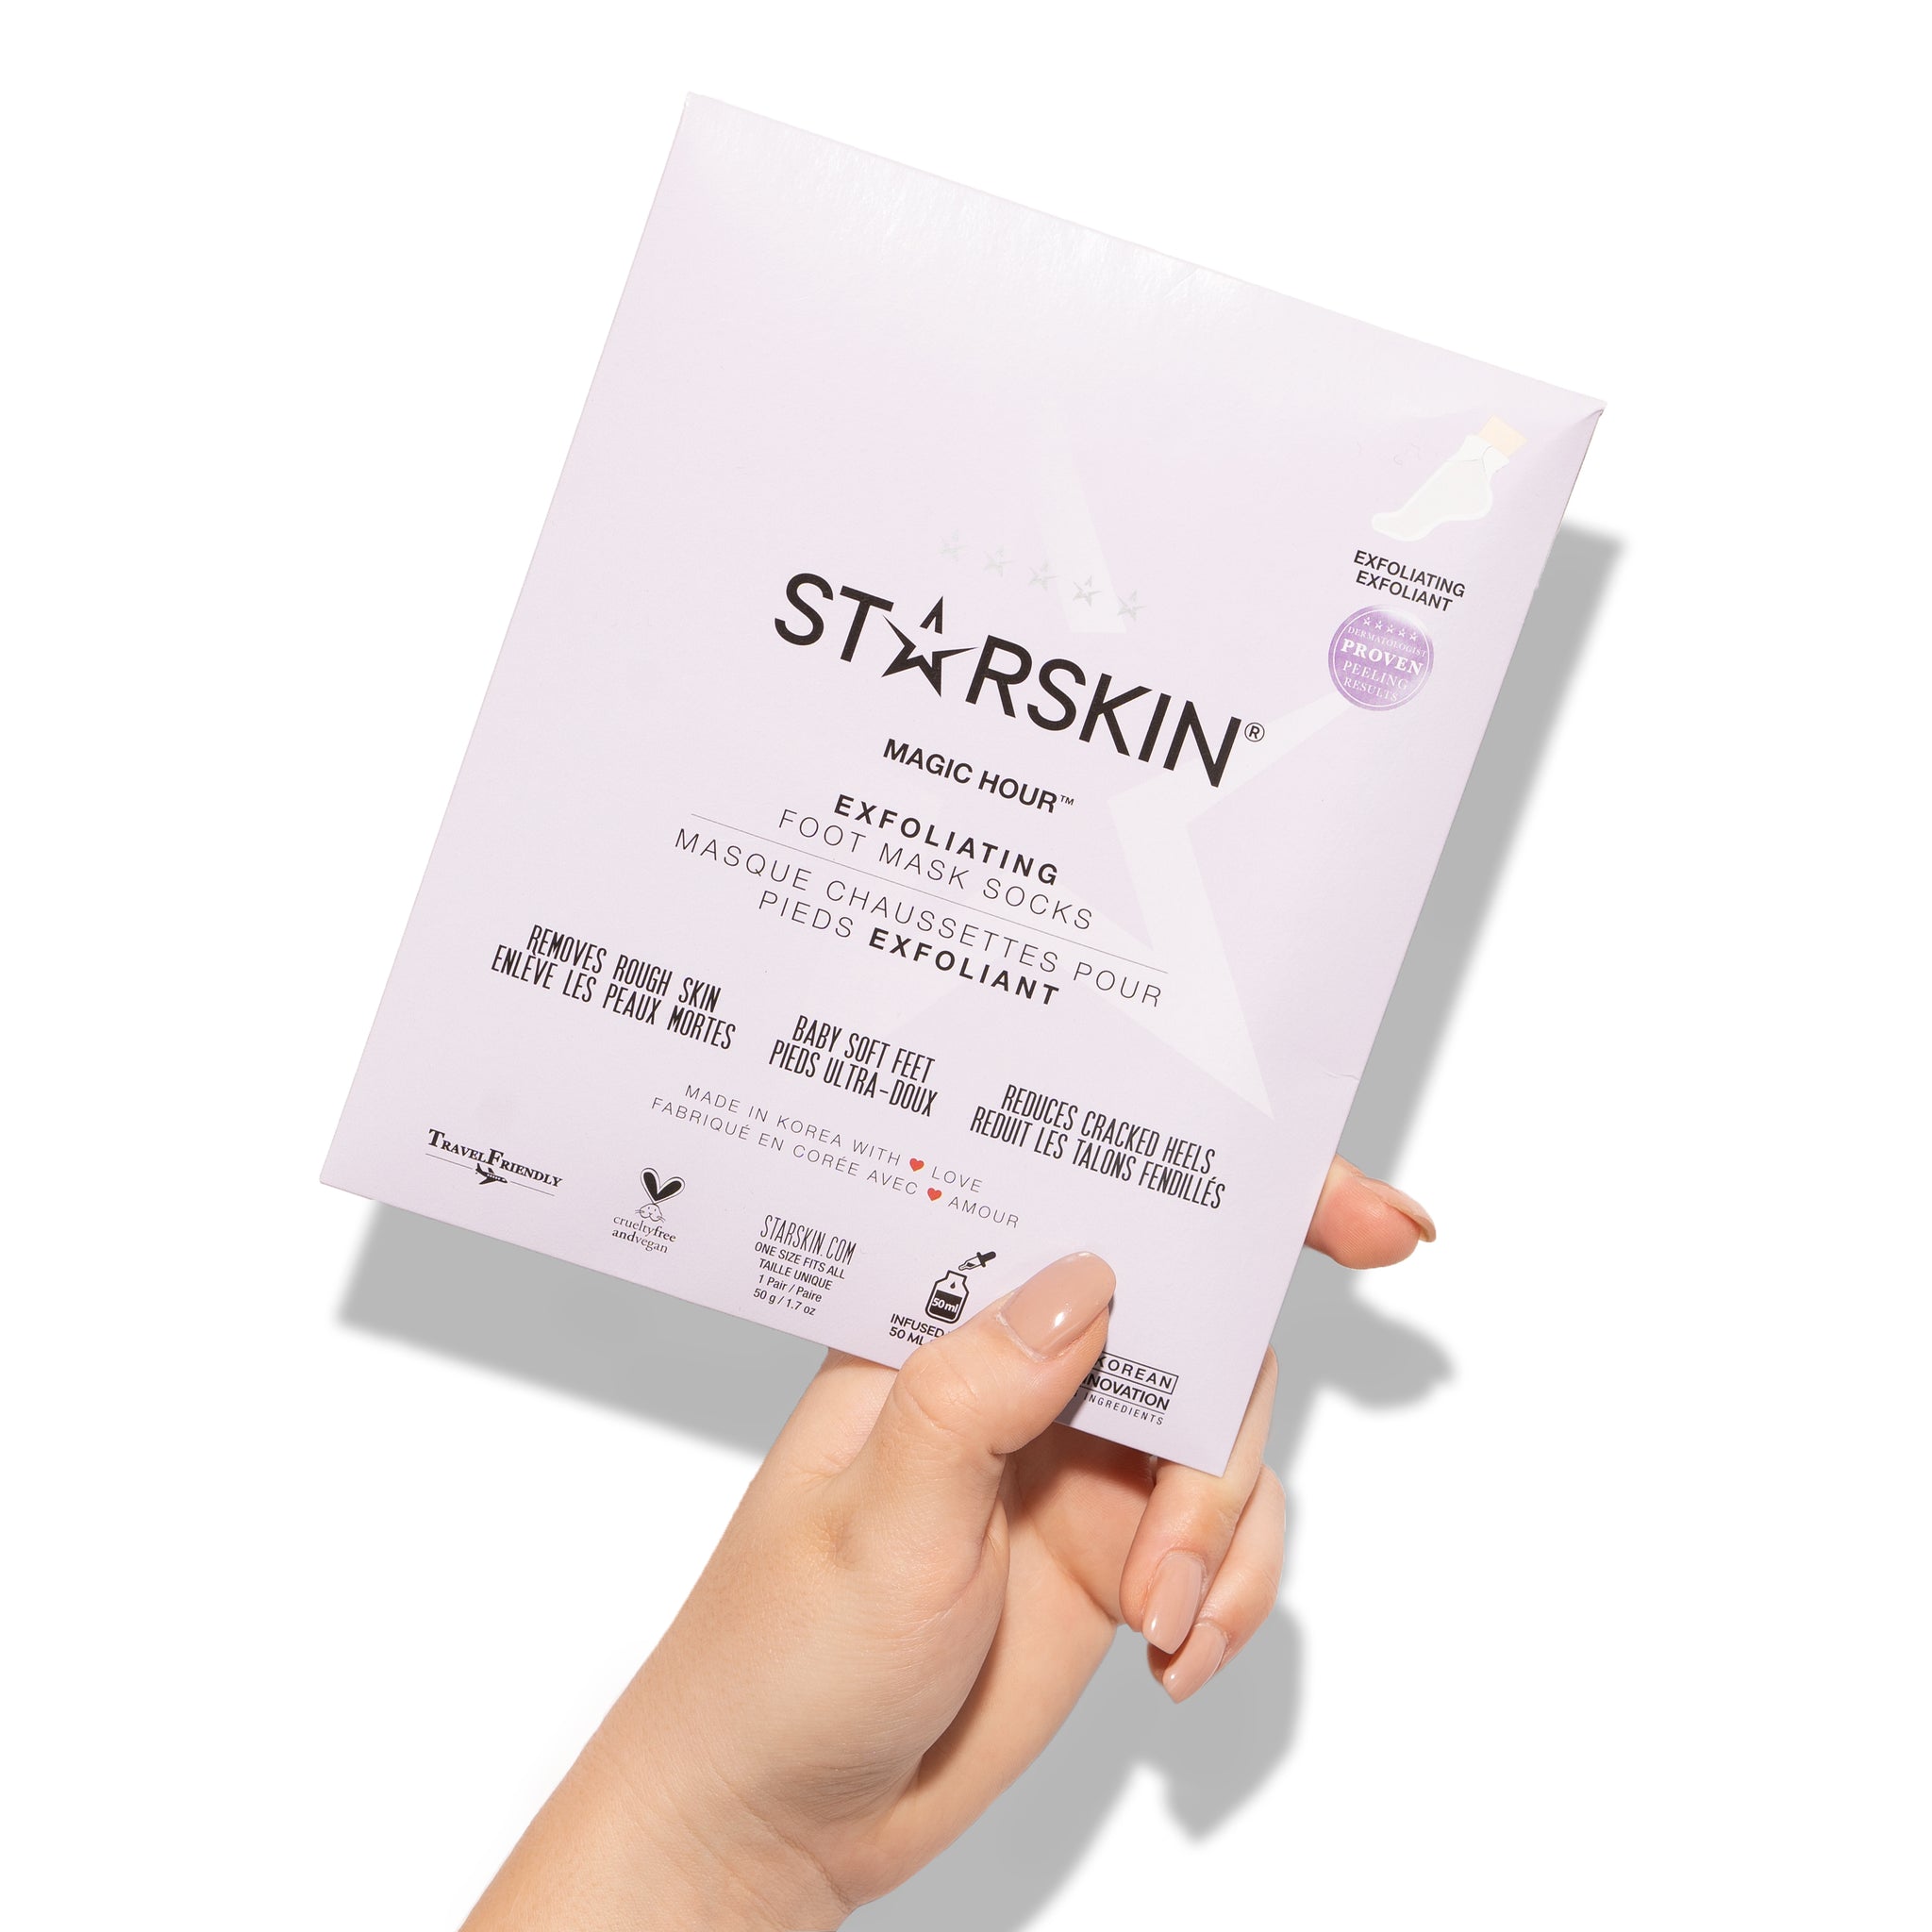 Product packaging of starskin's magic hour foot mask is being held in a persons hand.